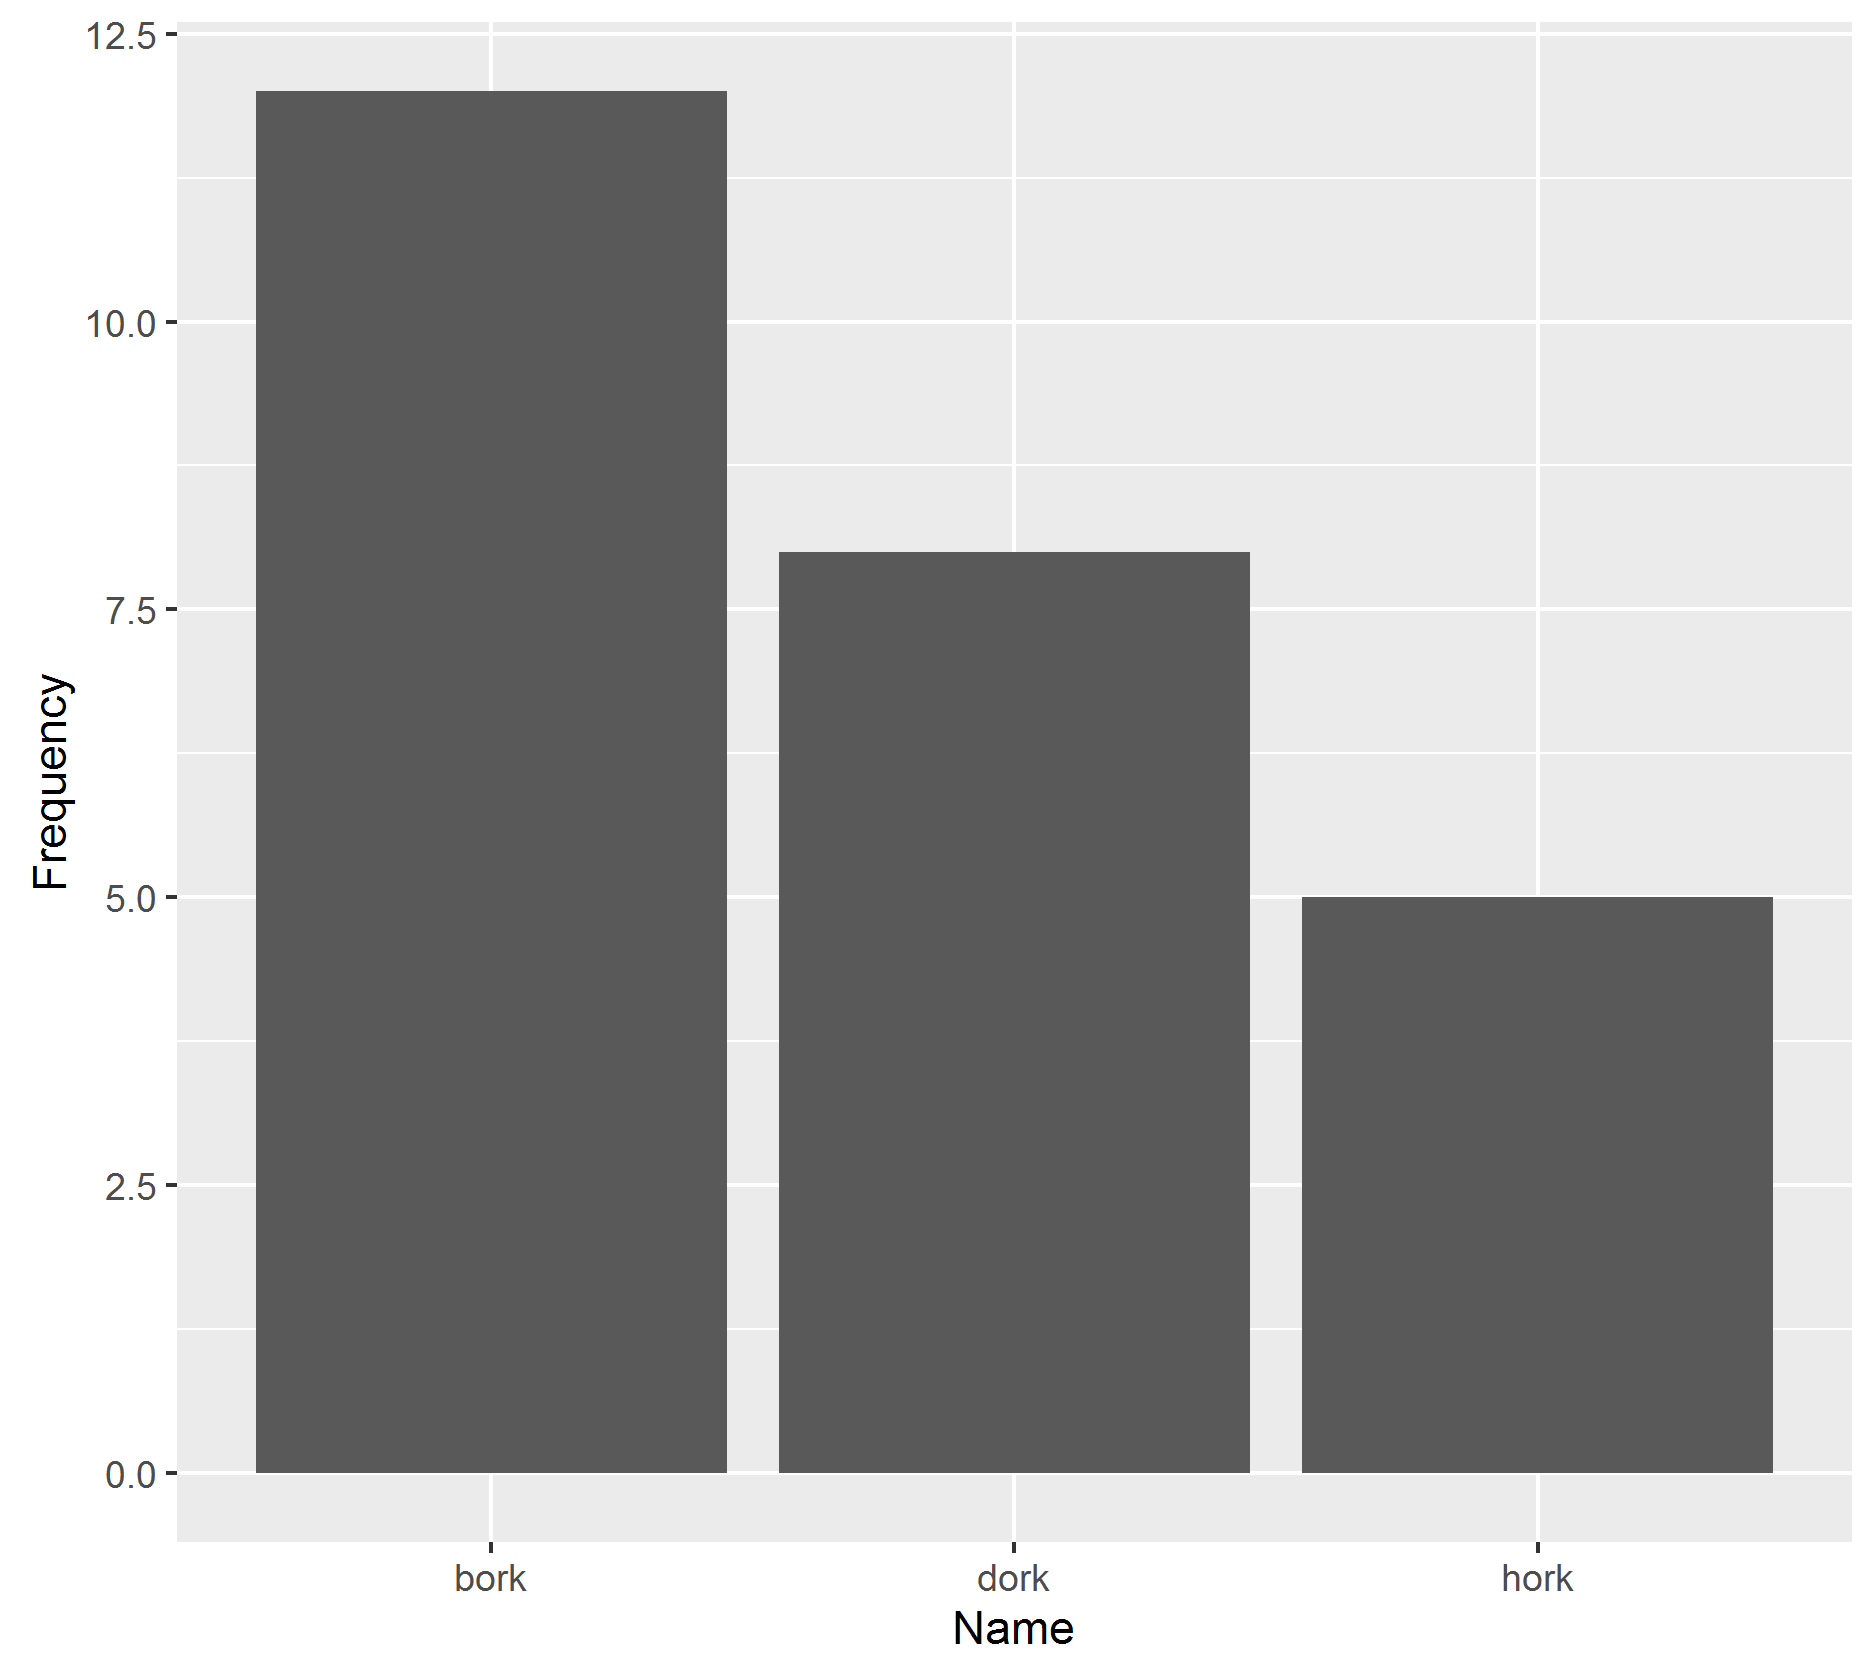 ggplot(dat, aes(Name, Frequency)) + geom_bar(stat =“identity”)